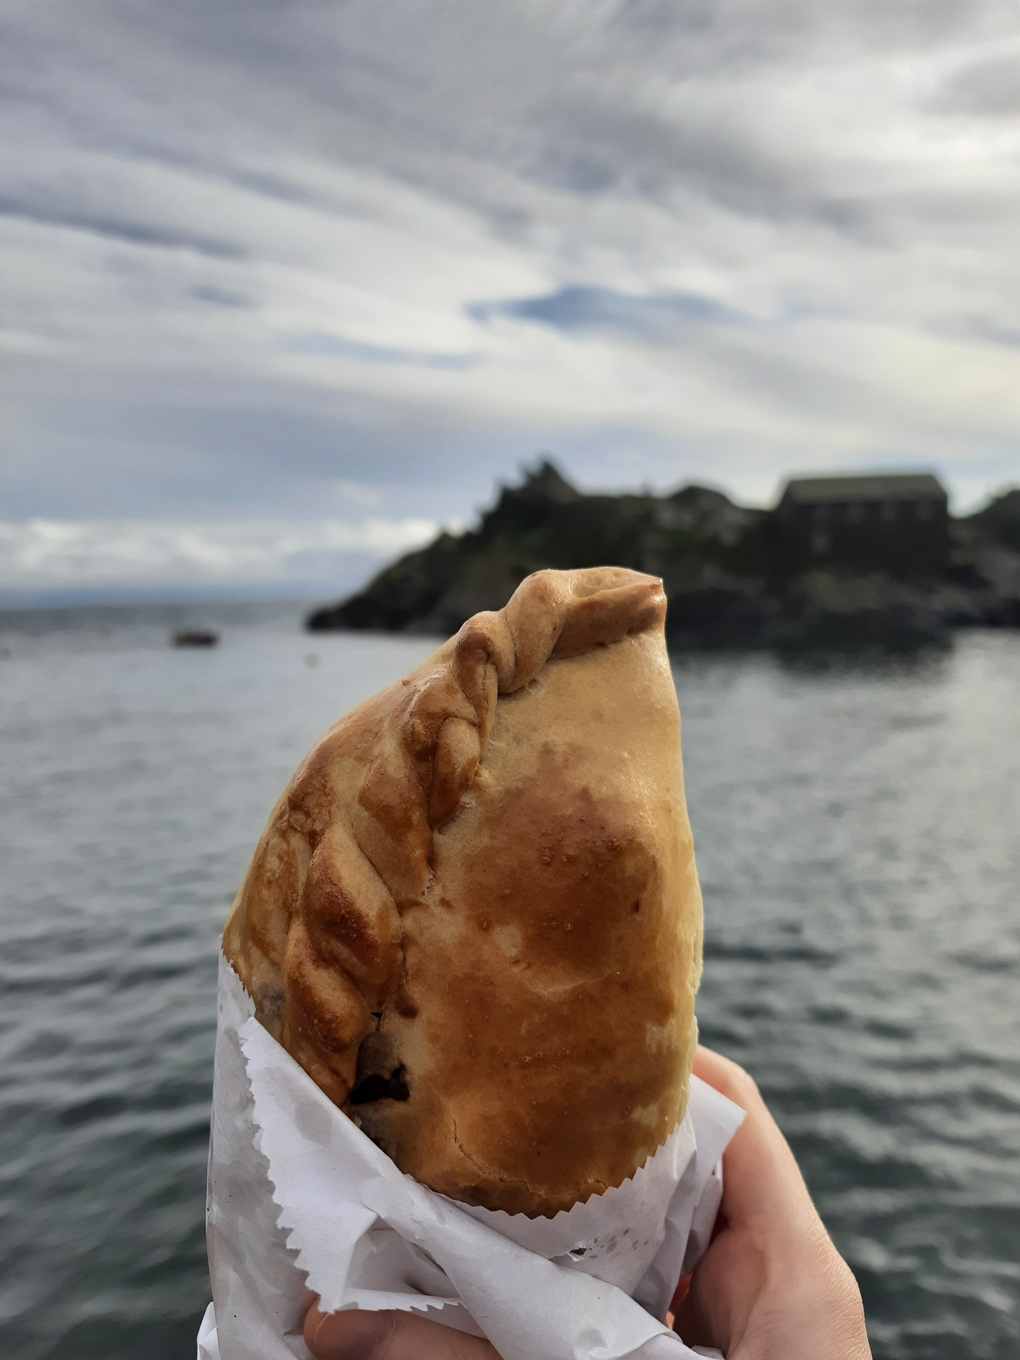 A Cornish pasty against with the sea in the background